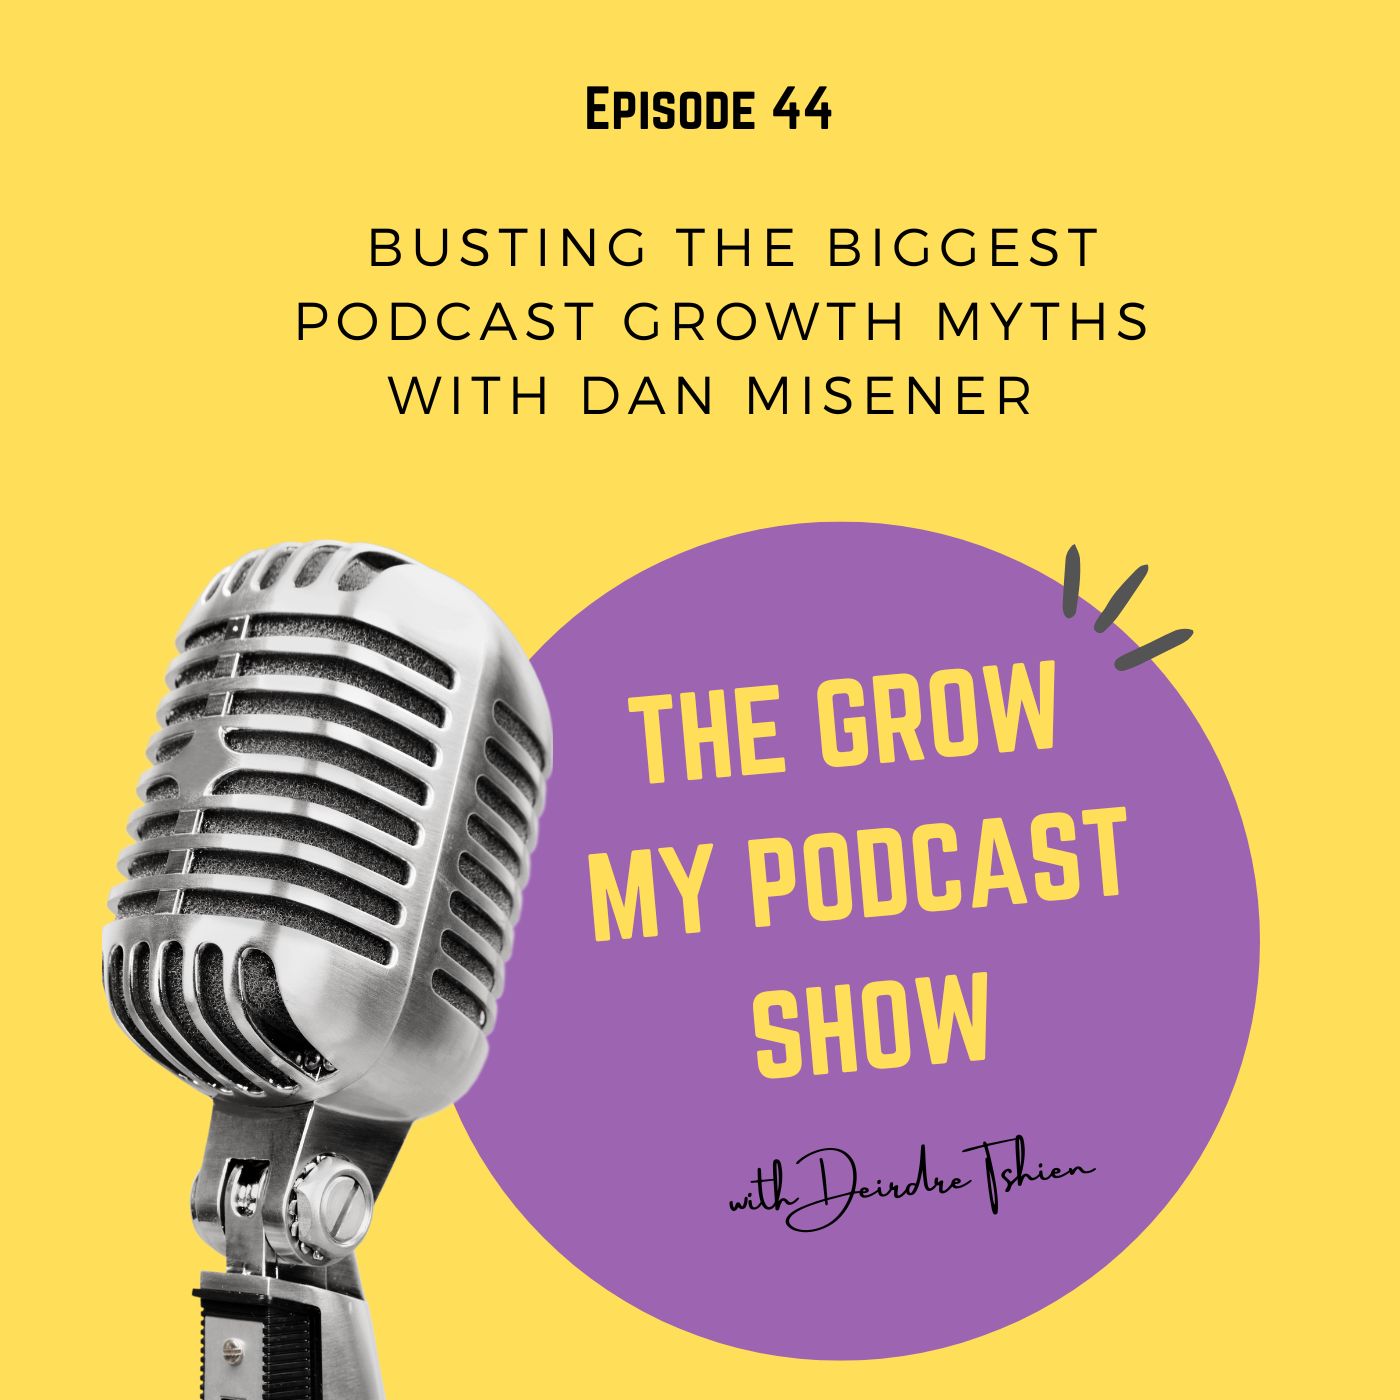 44. Busting the biggest podcast growth myths with Dan Misener Image